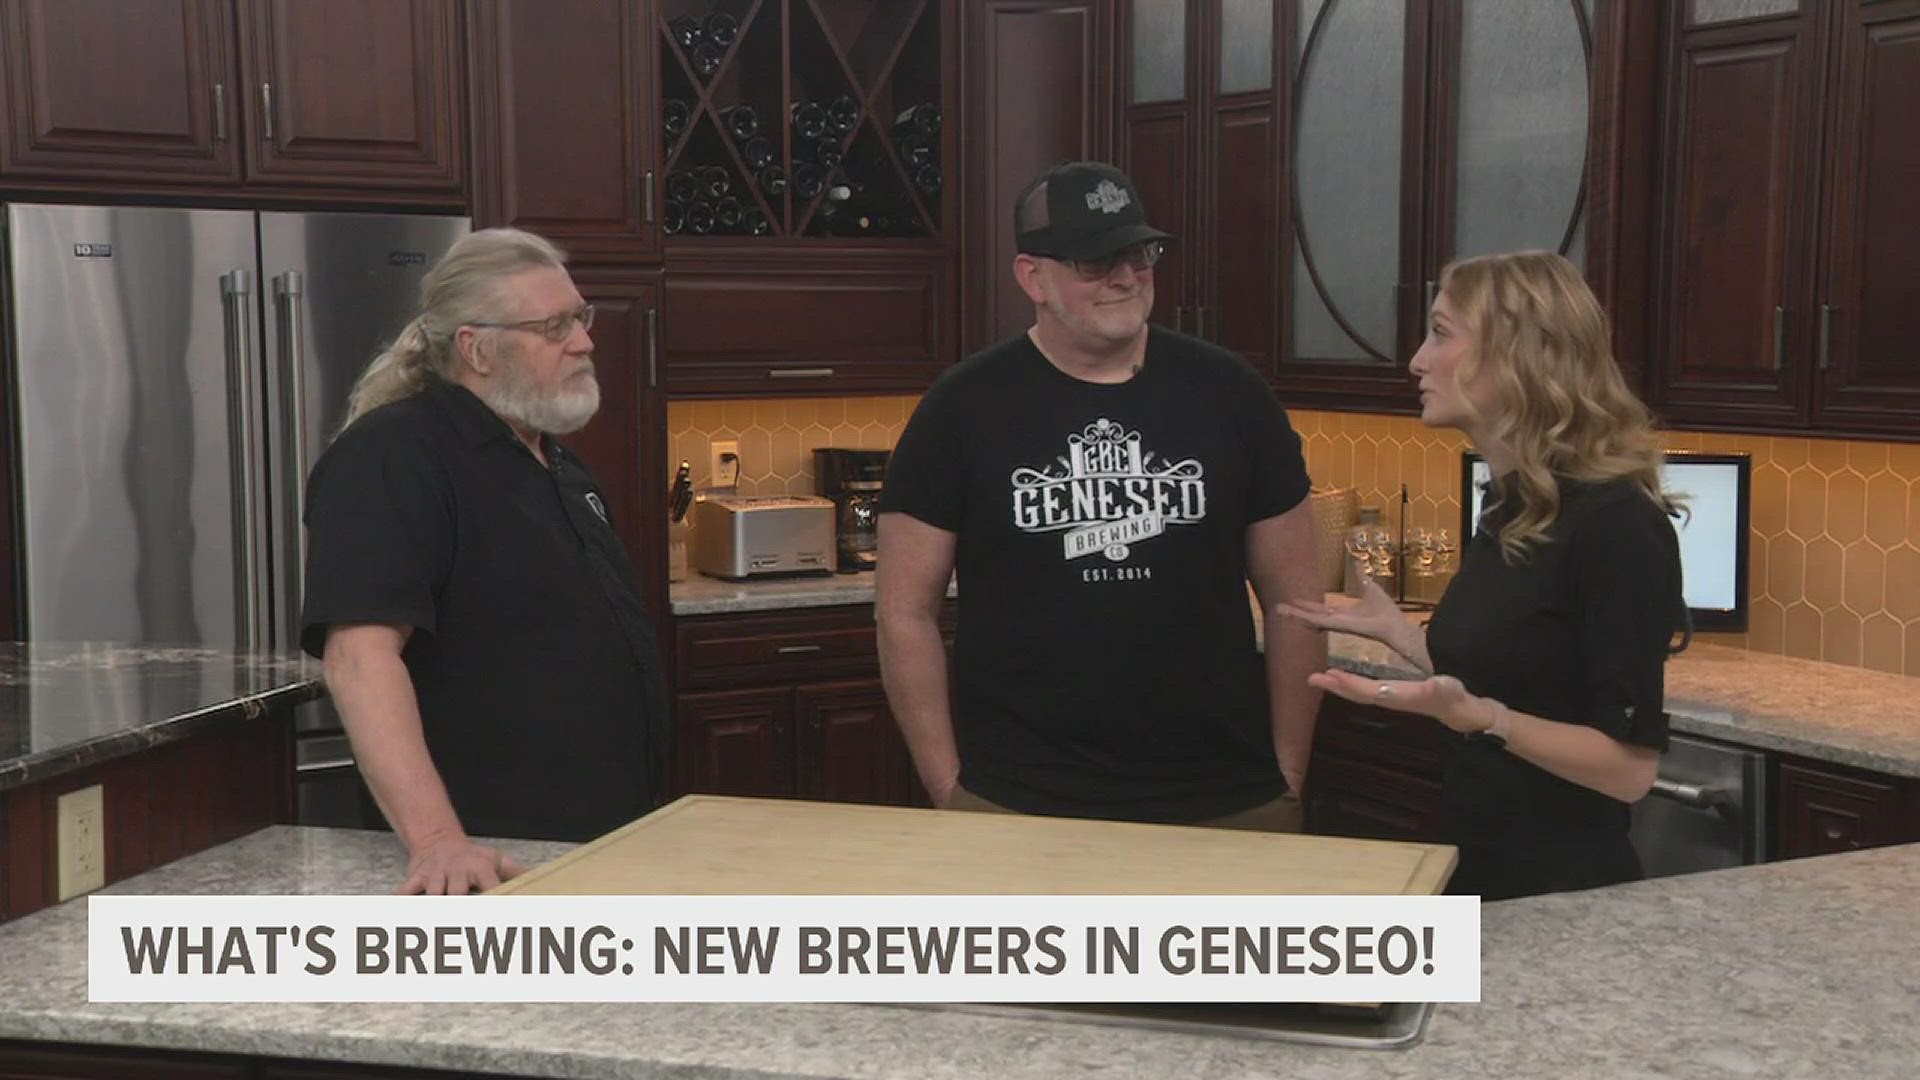 New brewers Patrick Stebly and Dean Wright stopped by the studio to show what's in store for the future of the Geneseo Brewing Company.